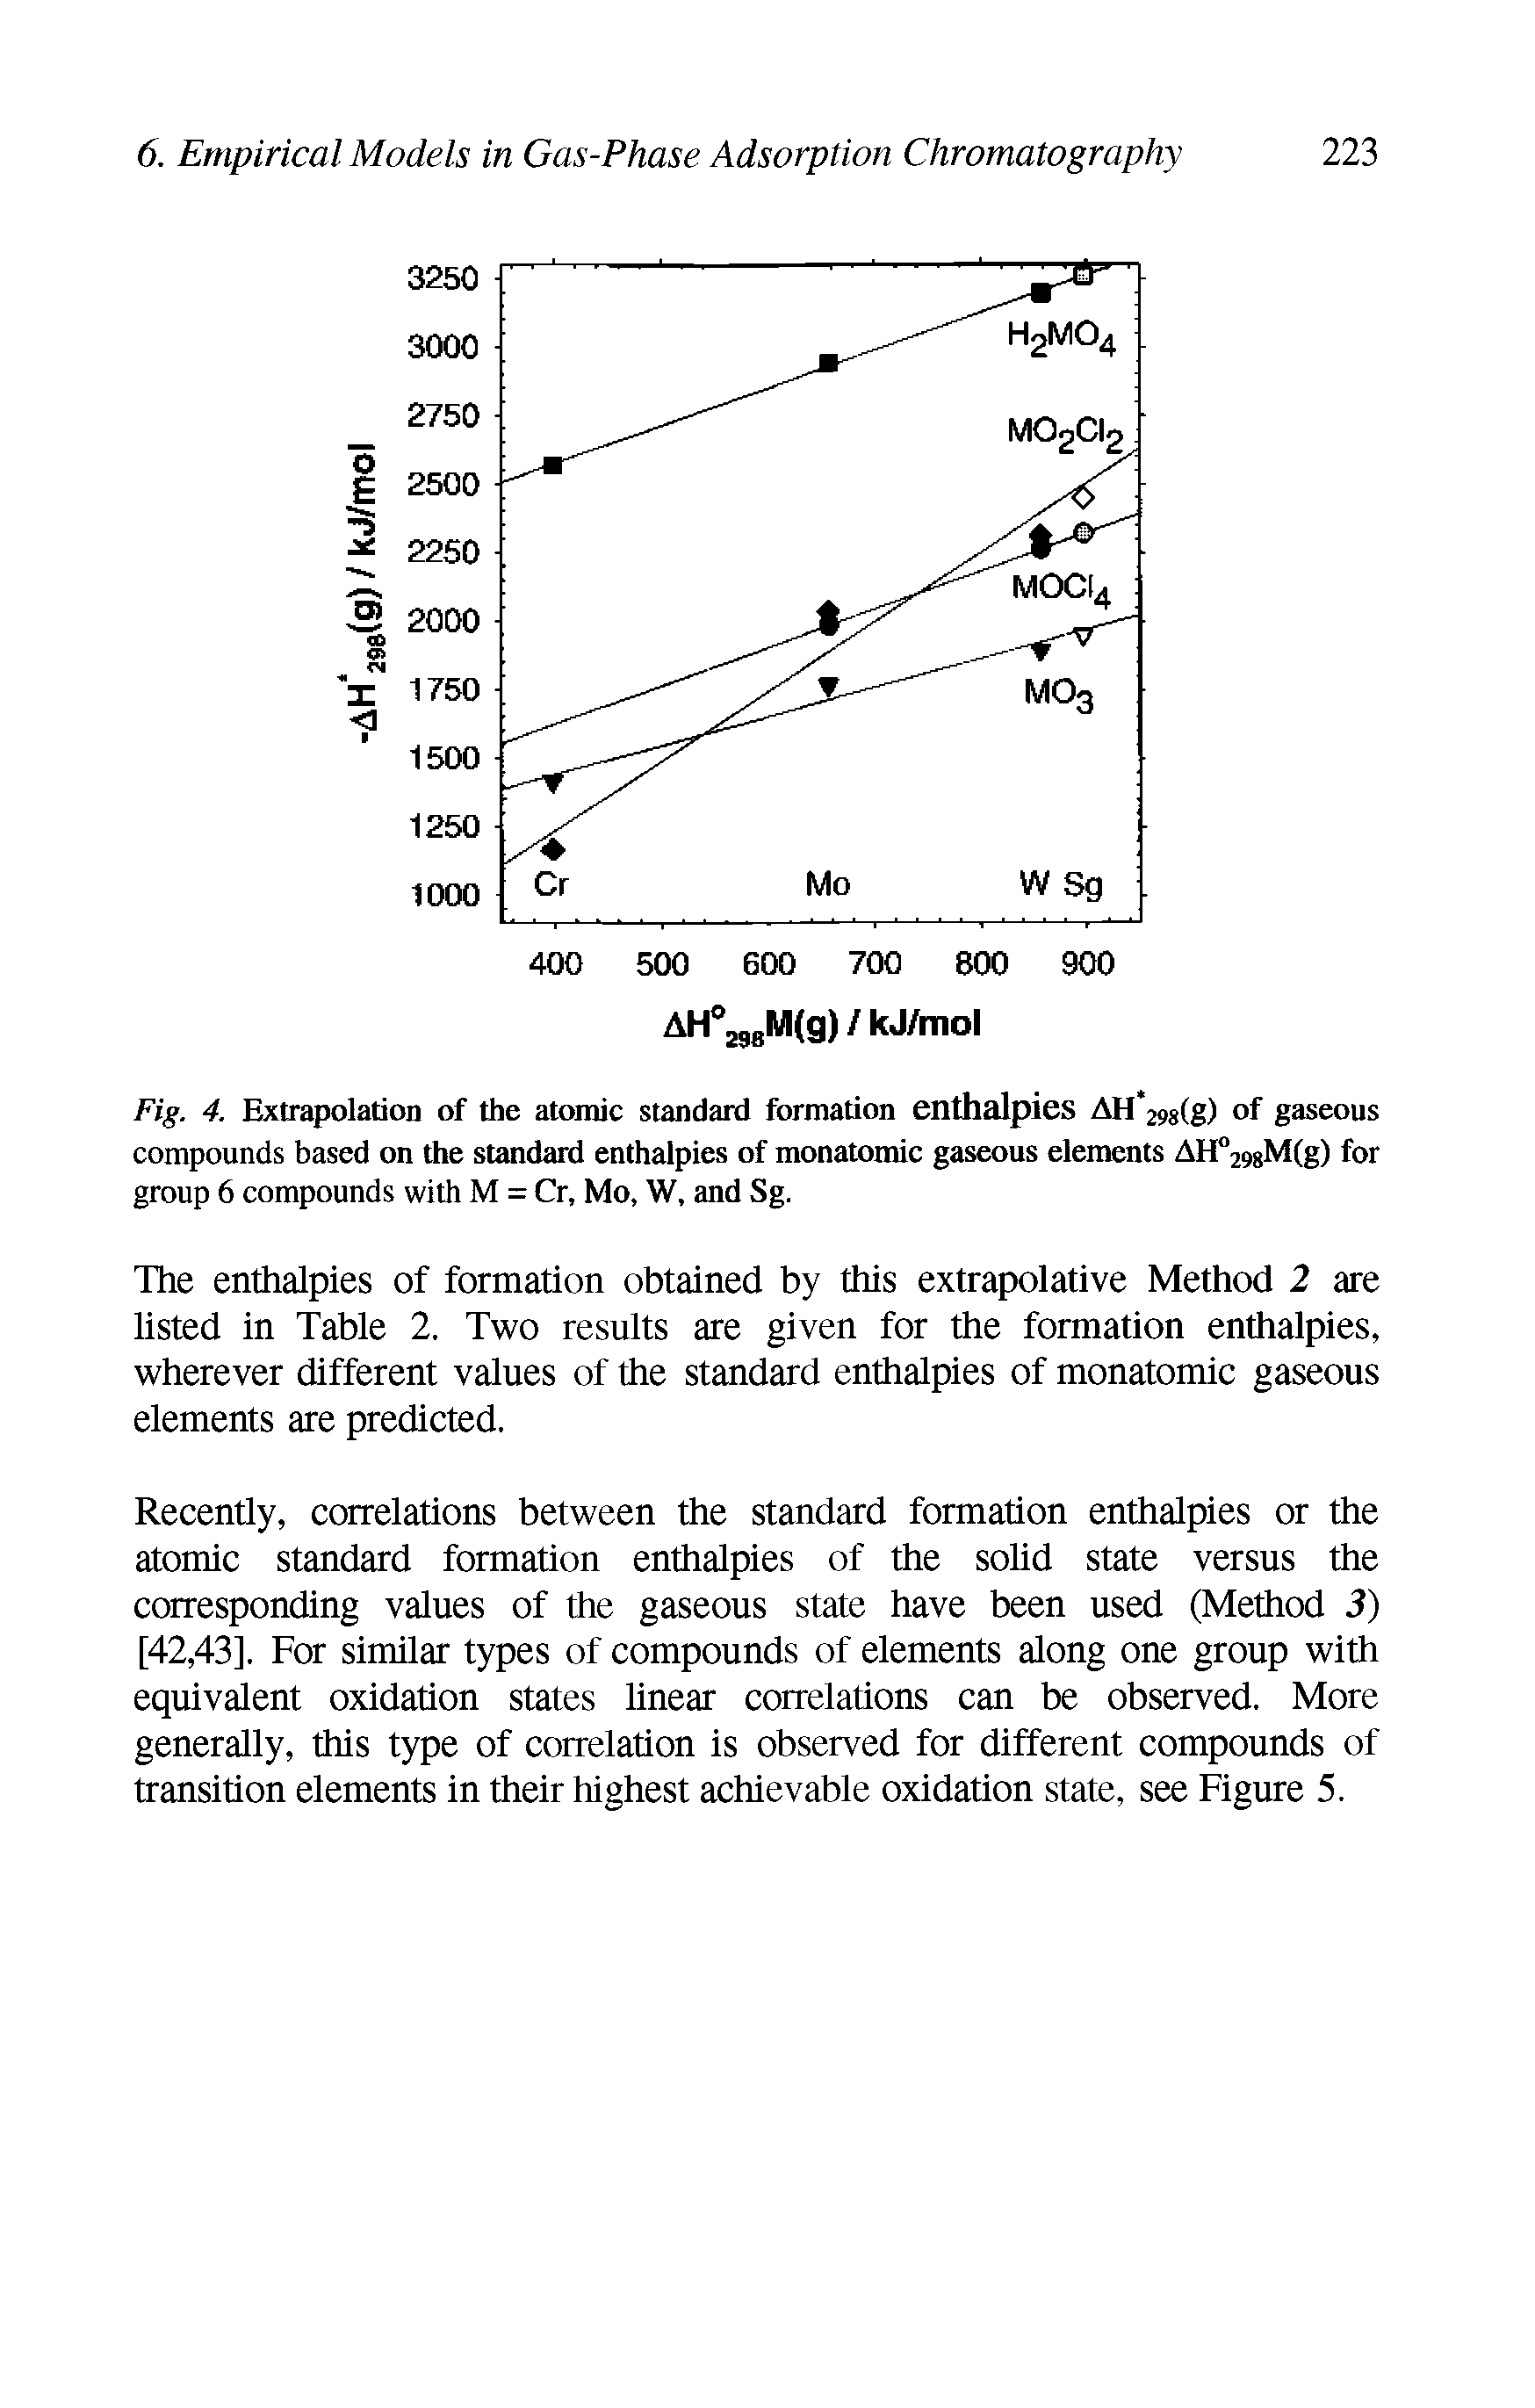 Fig. 4. Extrapolation of the atomic standard formation enthalpies AH 298(g) of gaseous compounds based on the standard enthalpies of monatomic gaseous elements AH°298M(g) for group 6 compounds with M = Cr, Mo, W, and Sg.